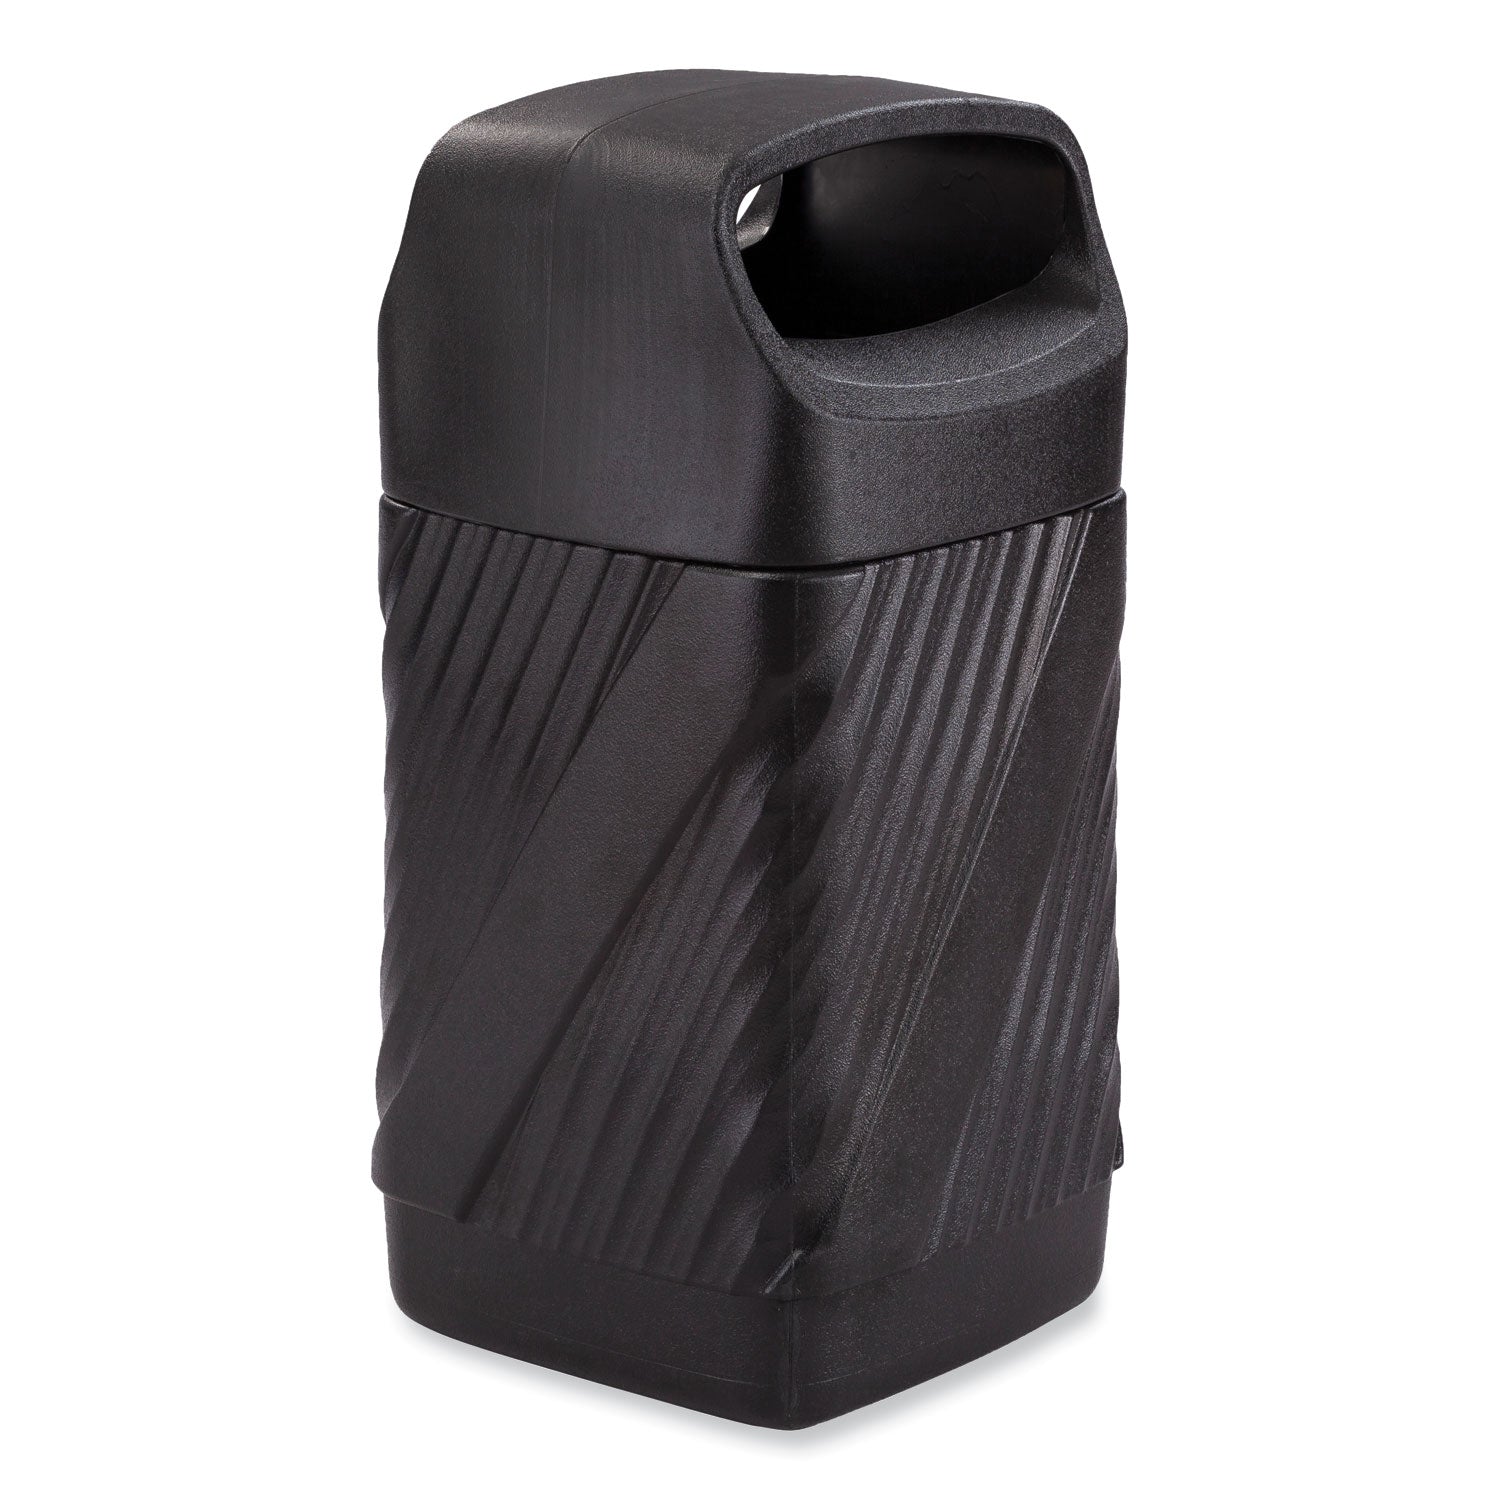 Safco Twist Waste Receptacle - 32 gal Capacity - Removable Lid, Durable, UV Resistant, Fade Resistant - 38" Height x 18.3" Width x 19.4" Depth - High-density Polyethylene (HDPE) - Black - 1 Each - 1